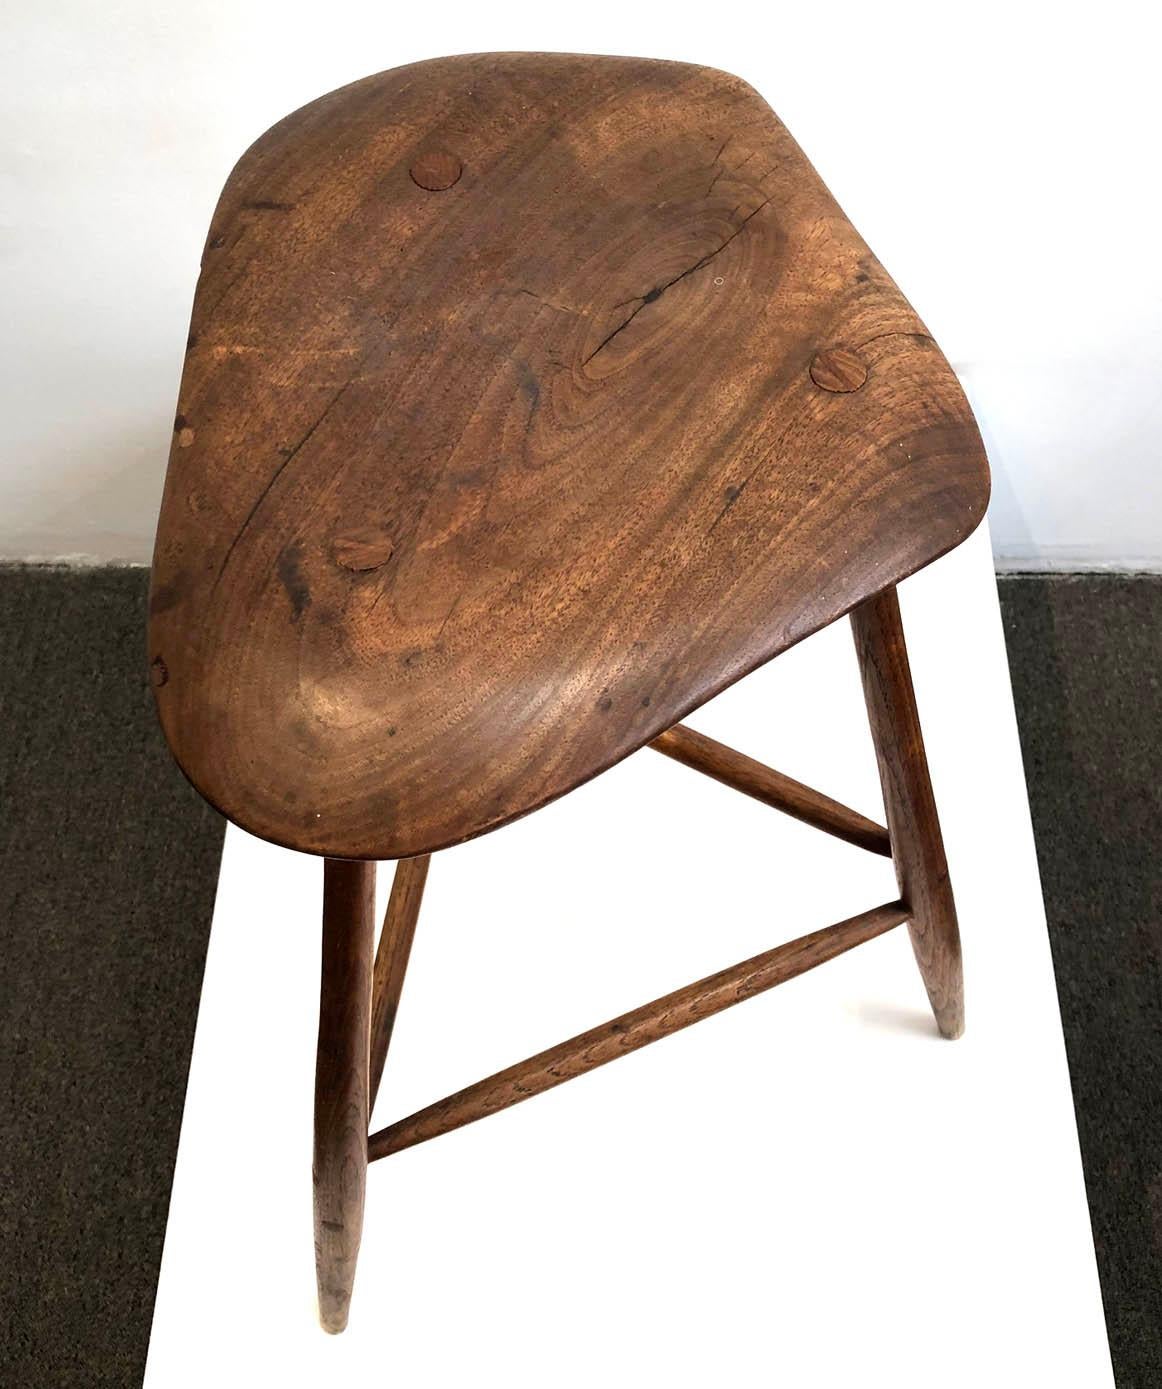 American Wharton Esherick Wooden Stool Signed and Dated